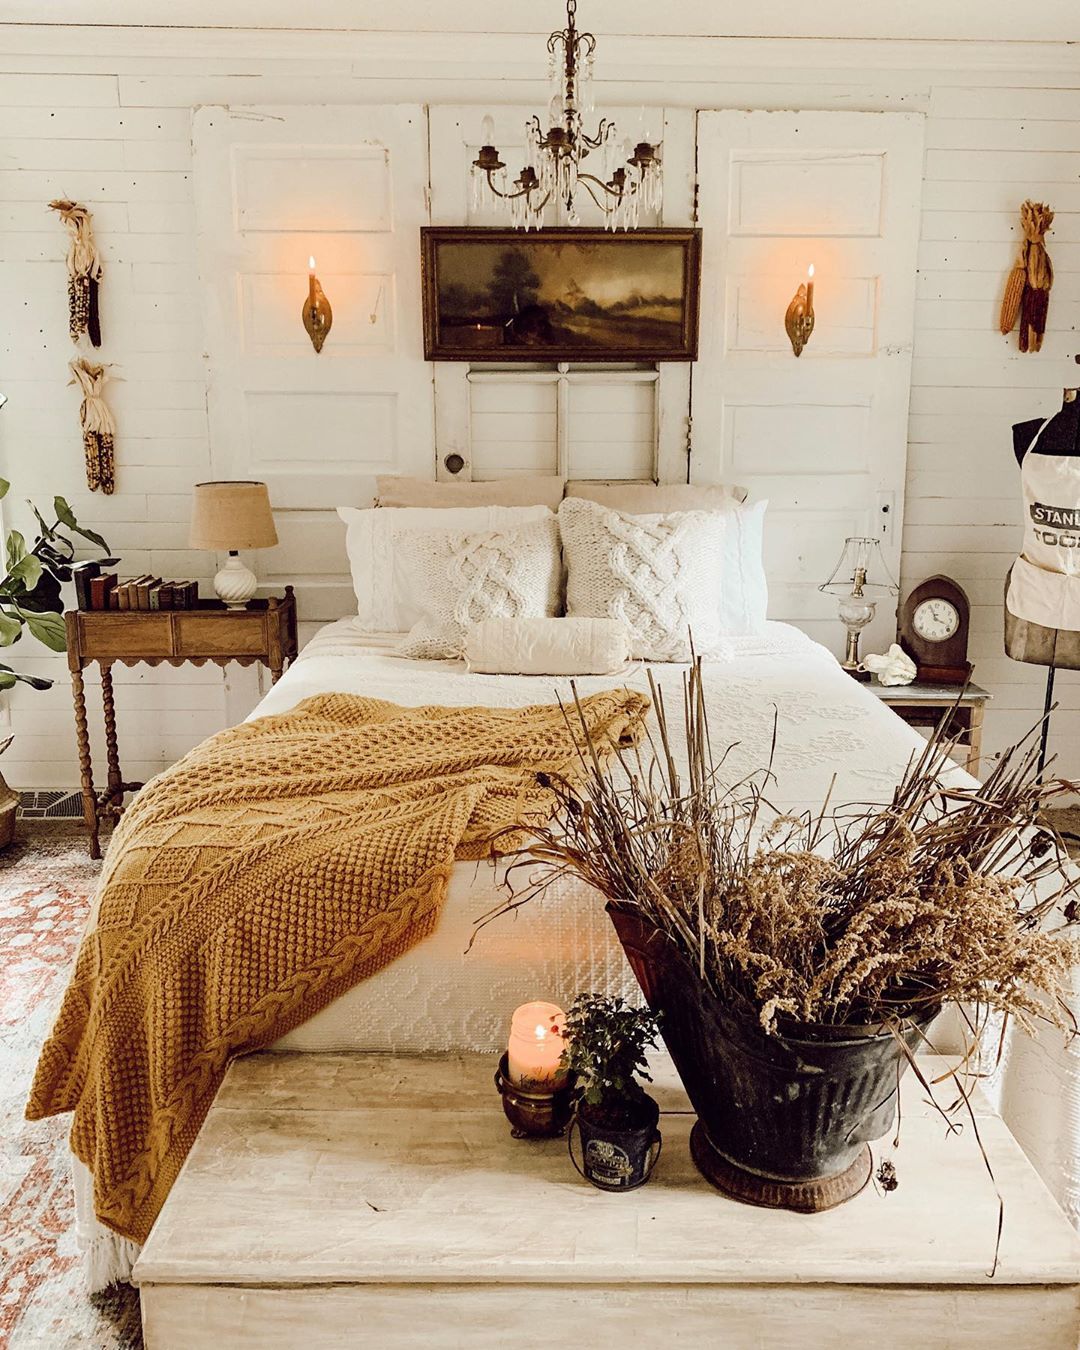 White bedroom with antique decor. Photo by Instagram user @candlewoodcottage 